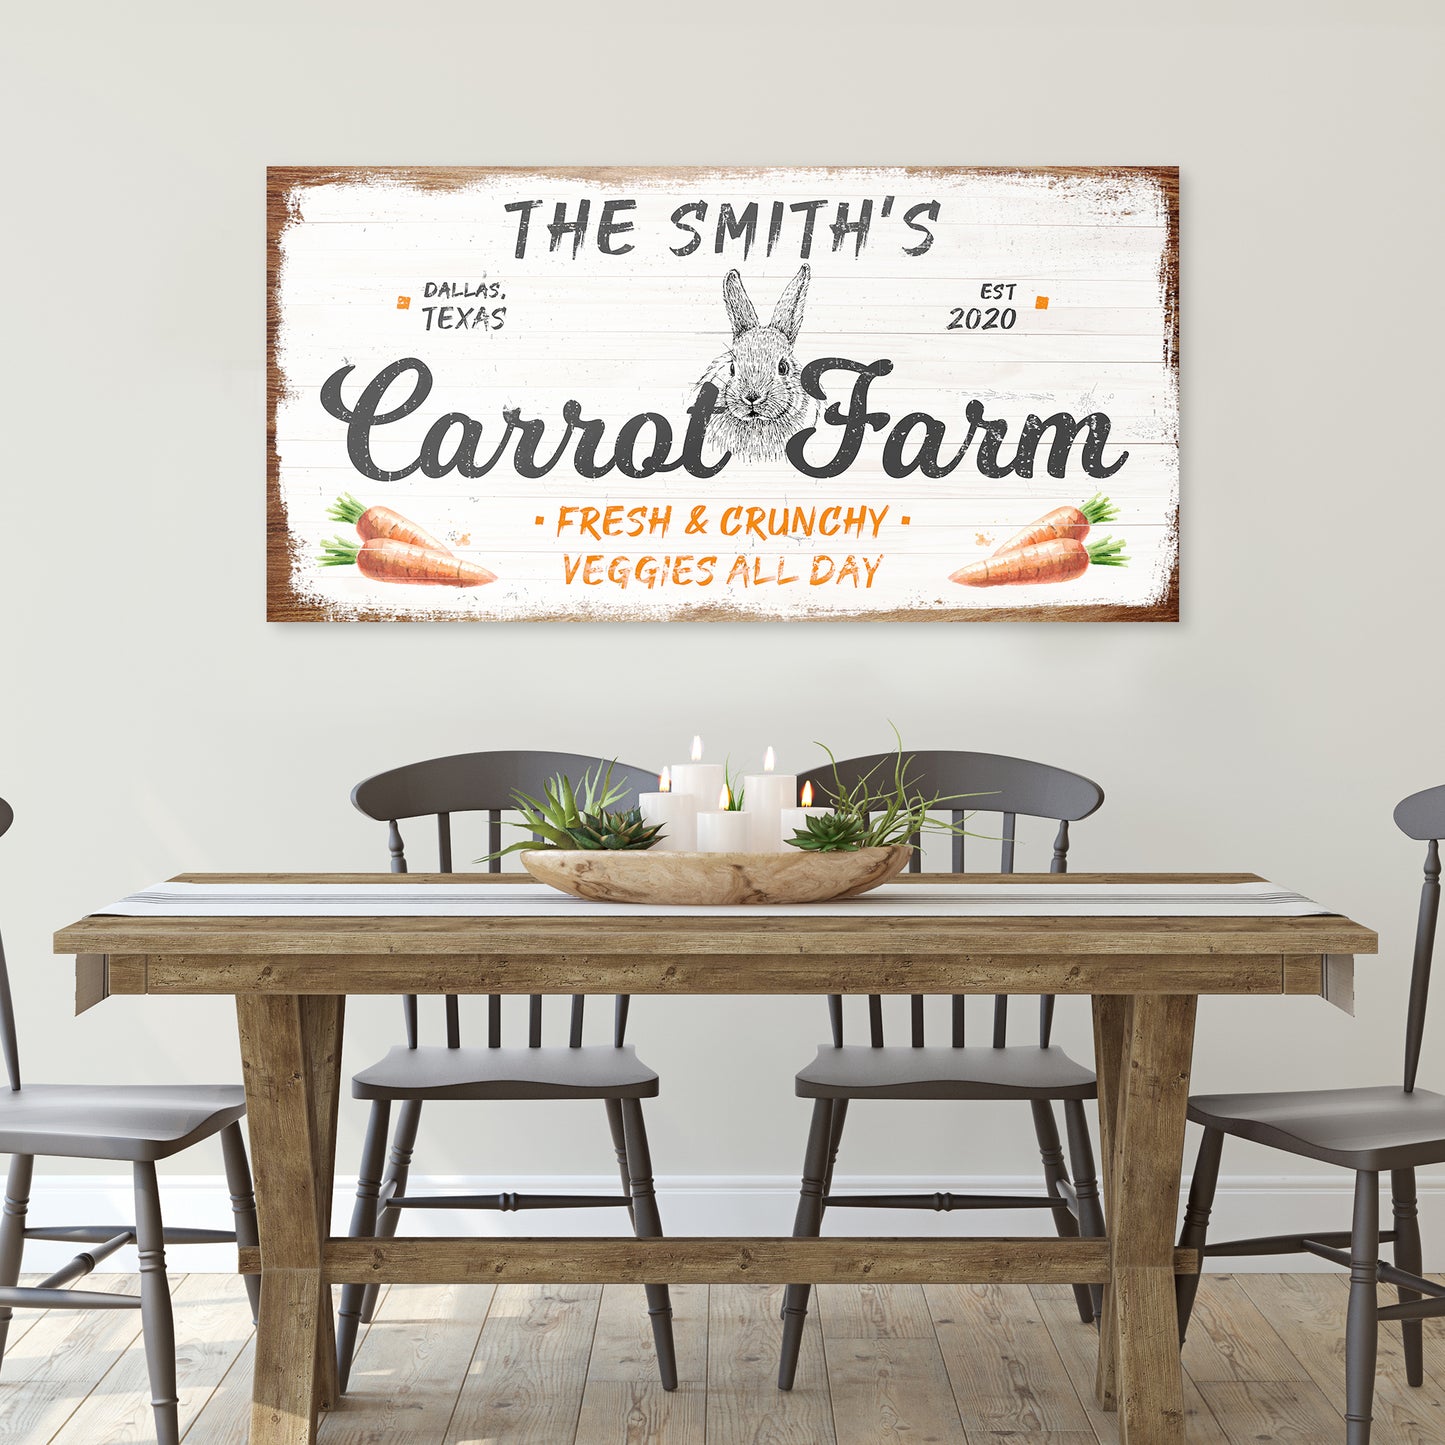 Easter Carrot Farm Sign - Image by Tailored Canvases